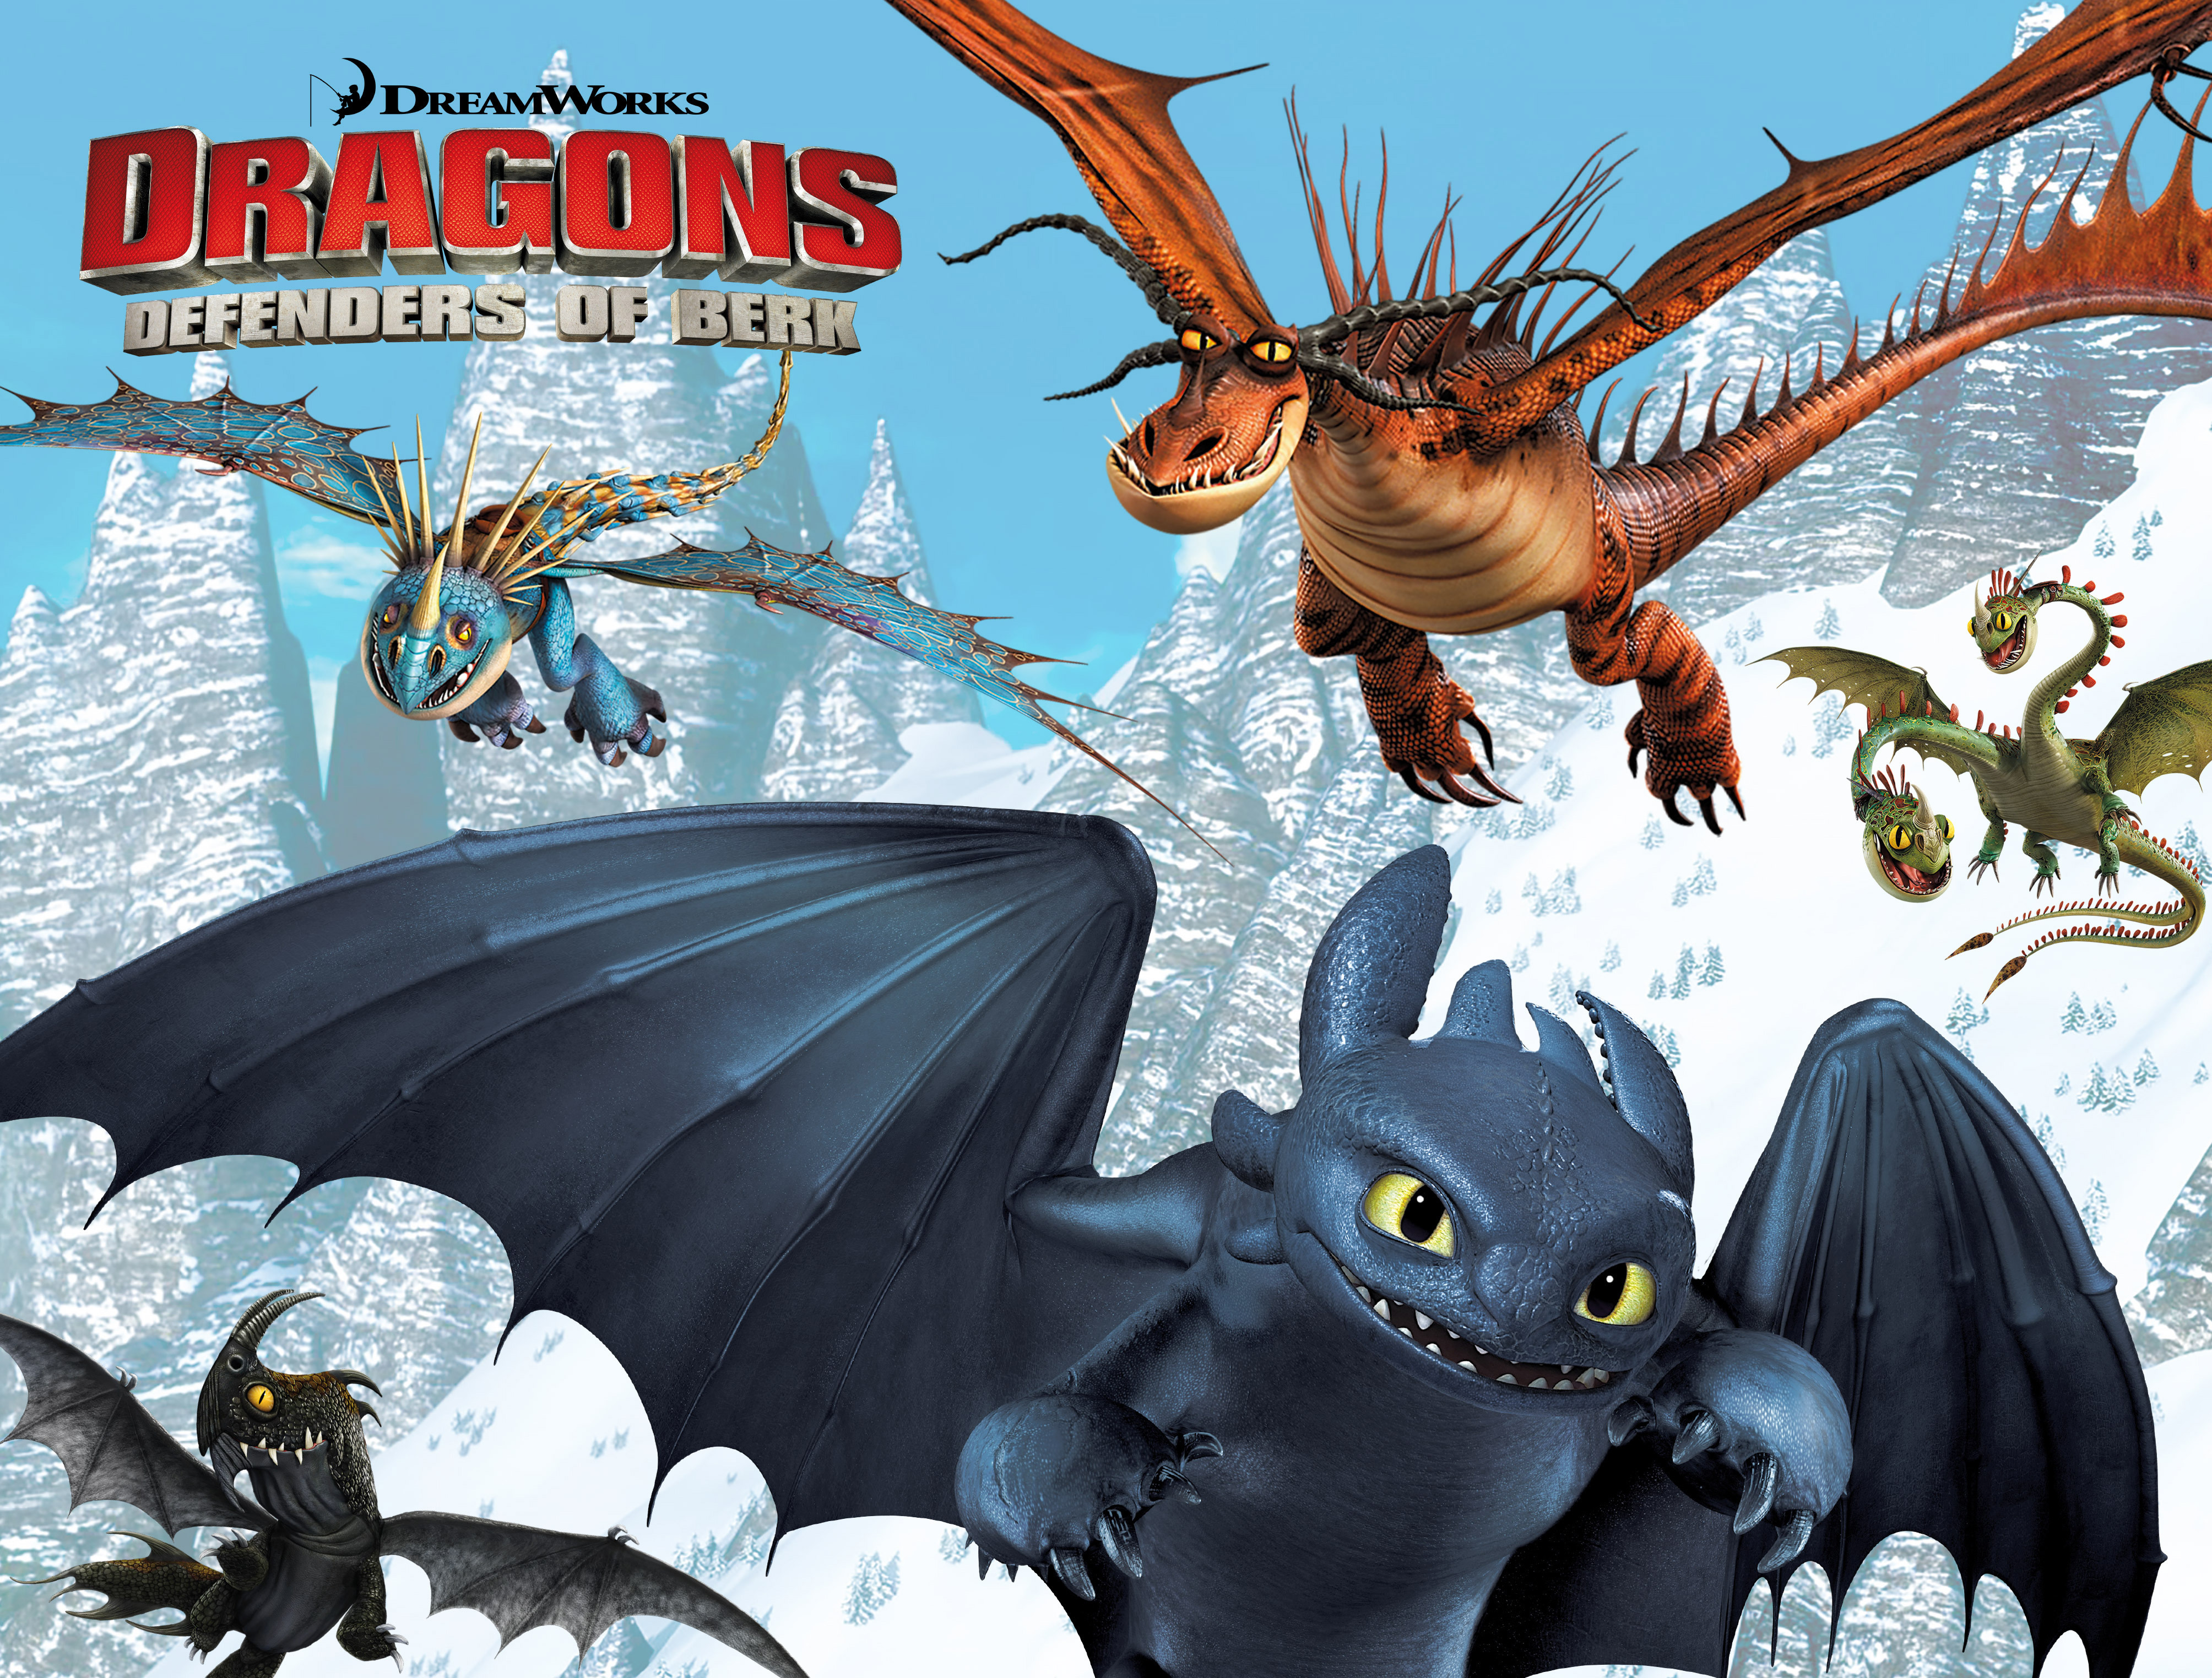 DreamWorks Dragons: Defenders of Berk Collection: Fire & Ice TPB #1 - English 54